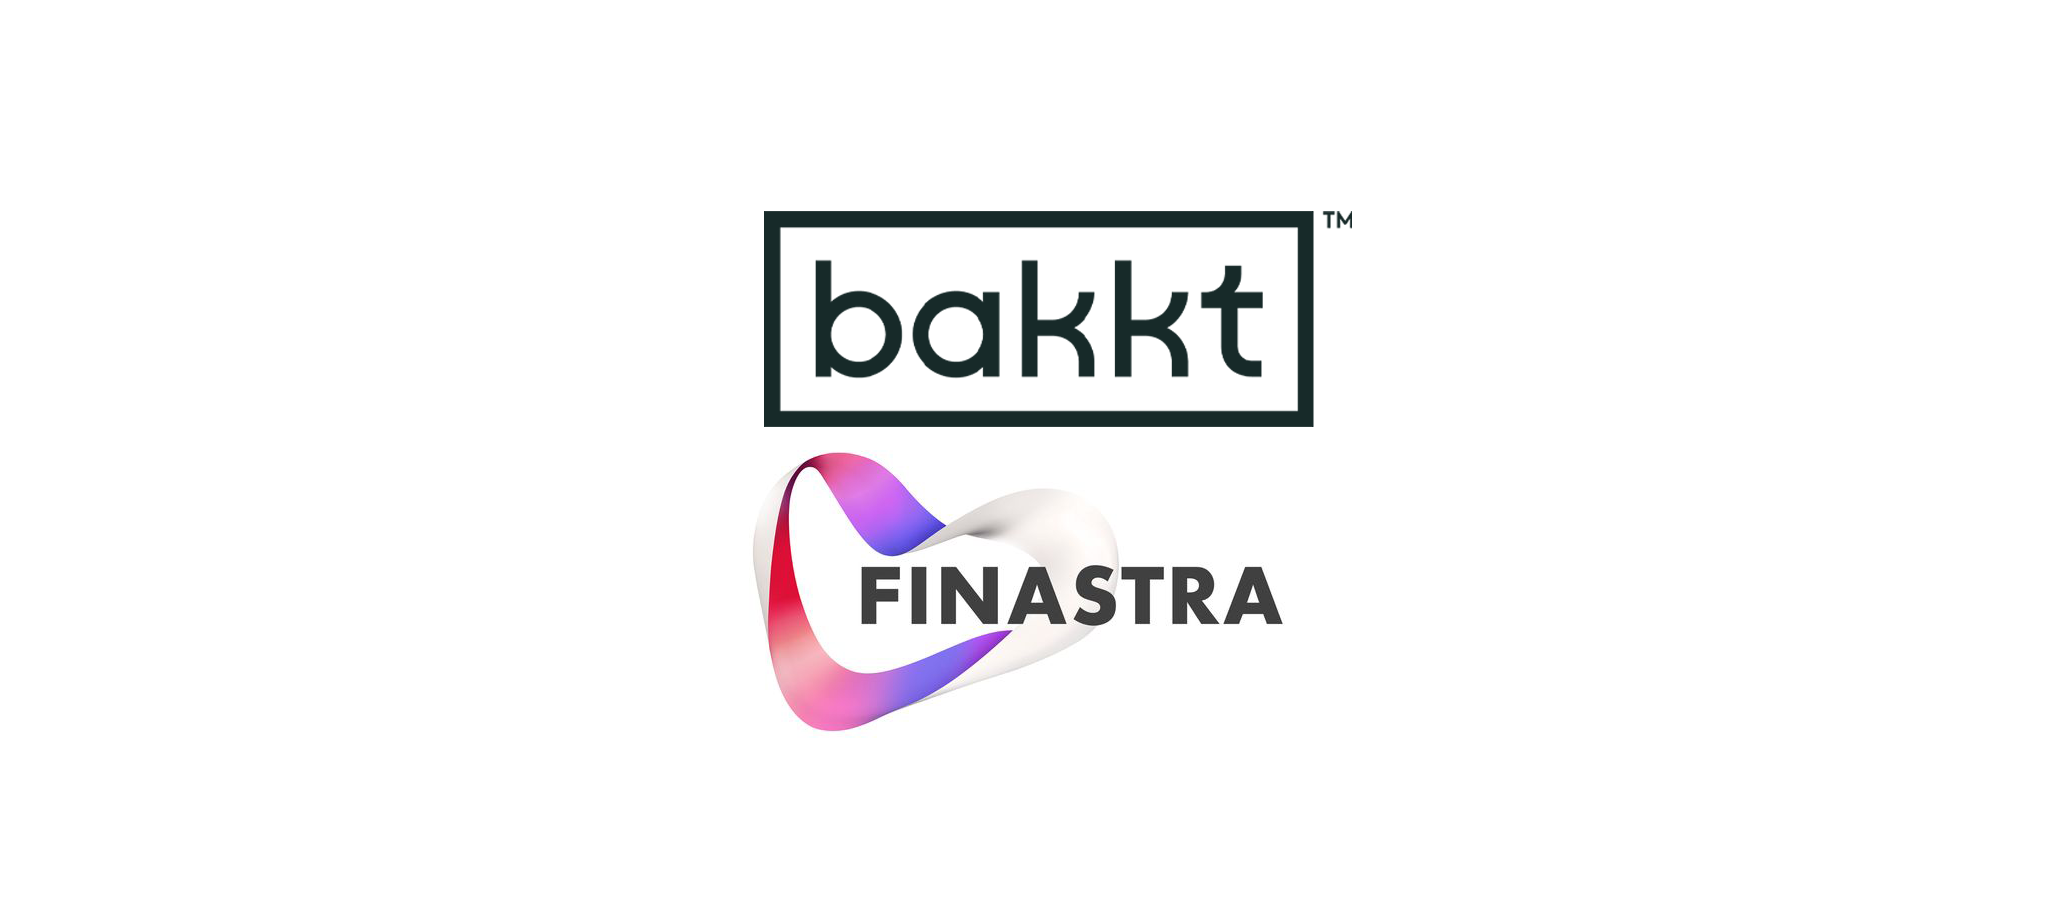 Finastra and Bakkt Announce Plans to Enable Crypto Trading for Community Banks and Credit Unions